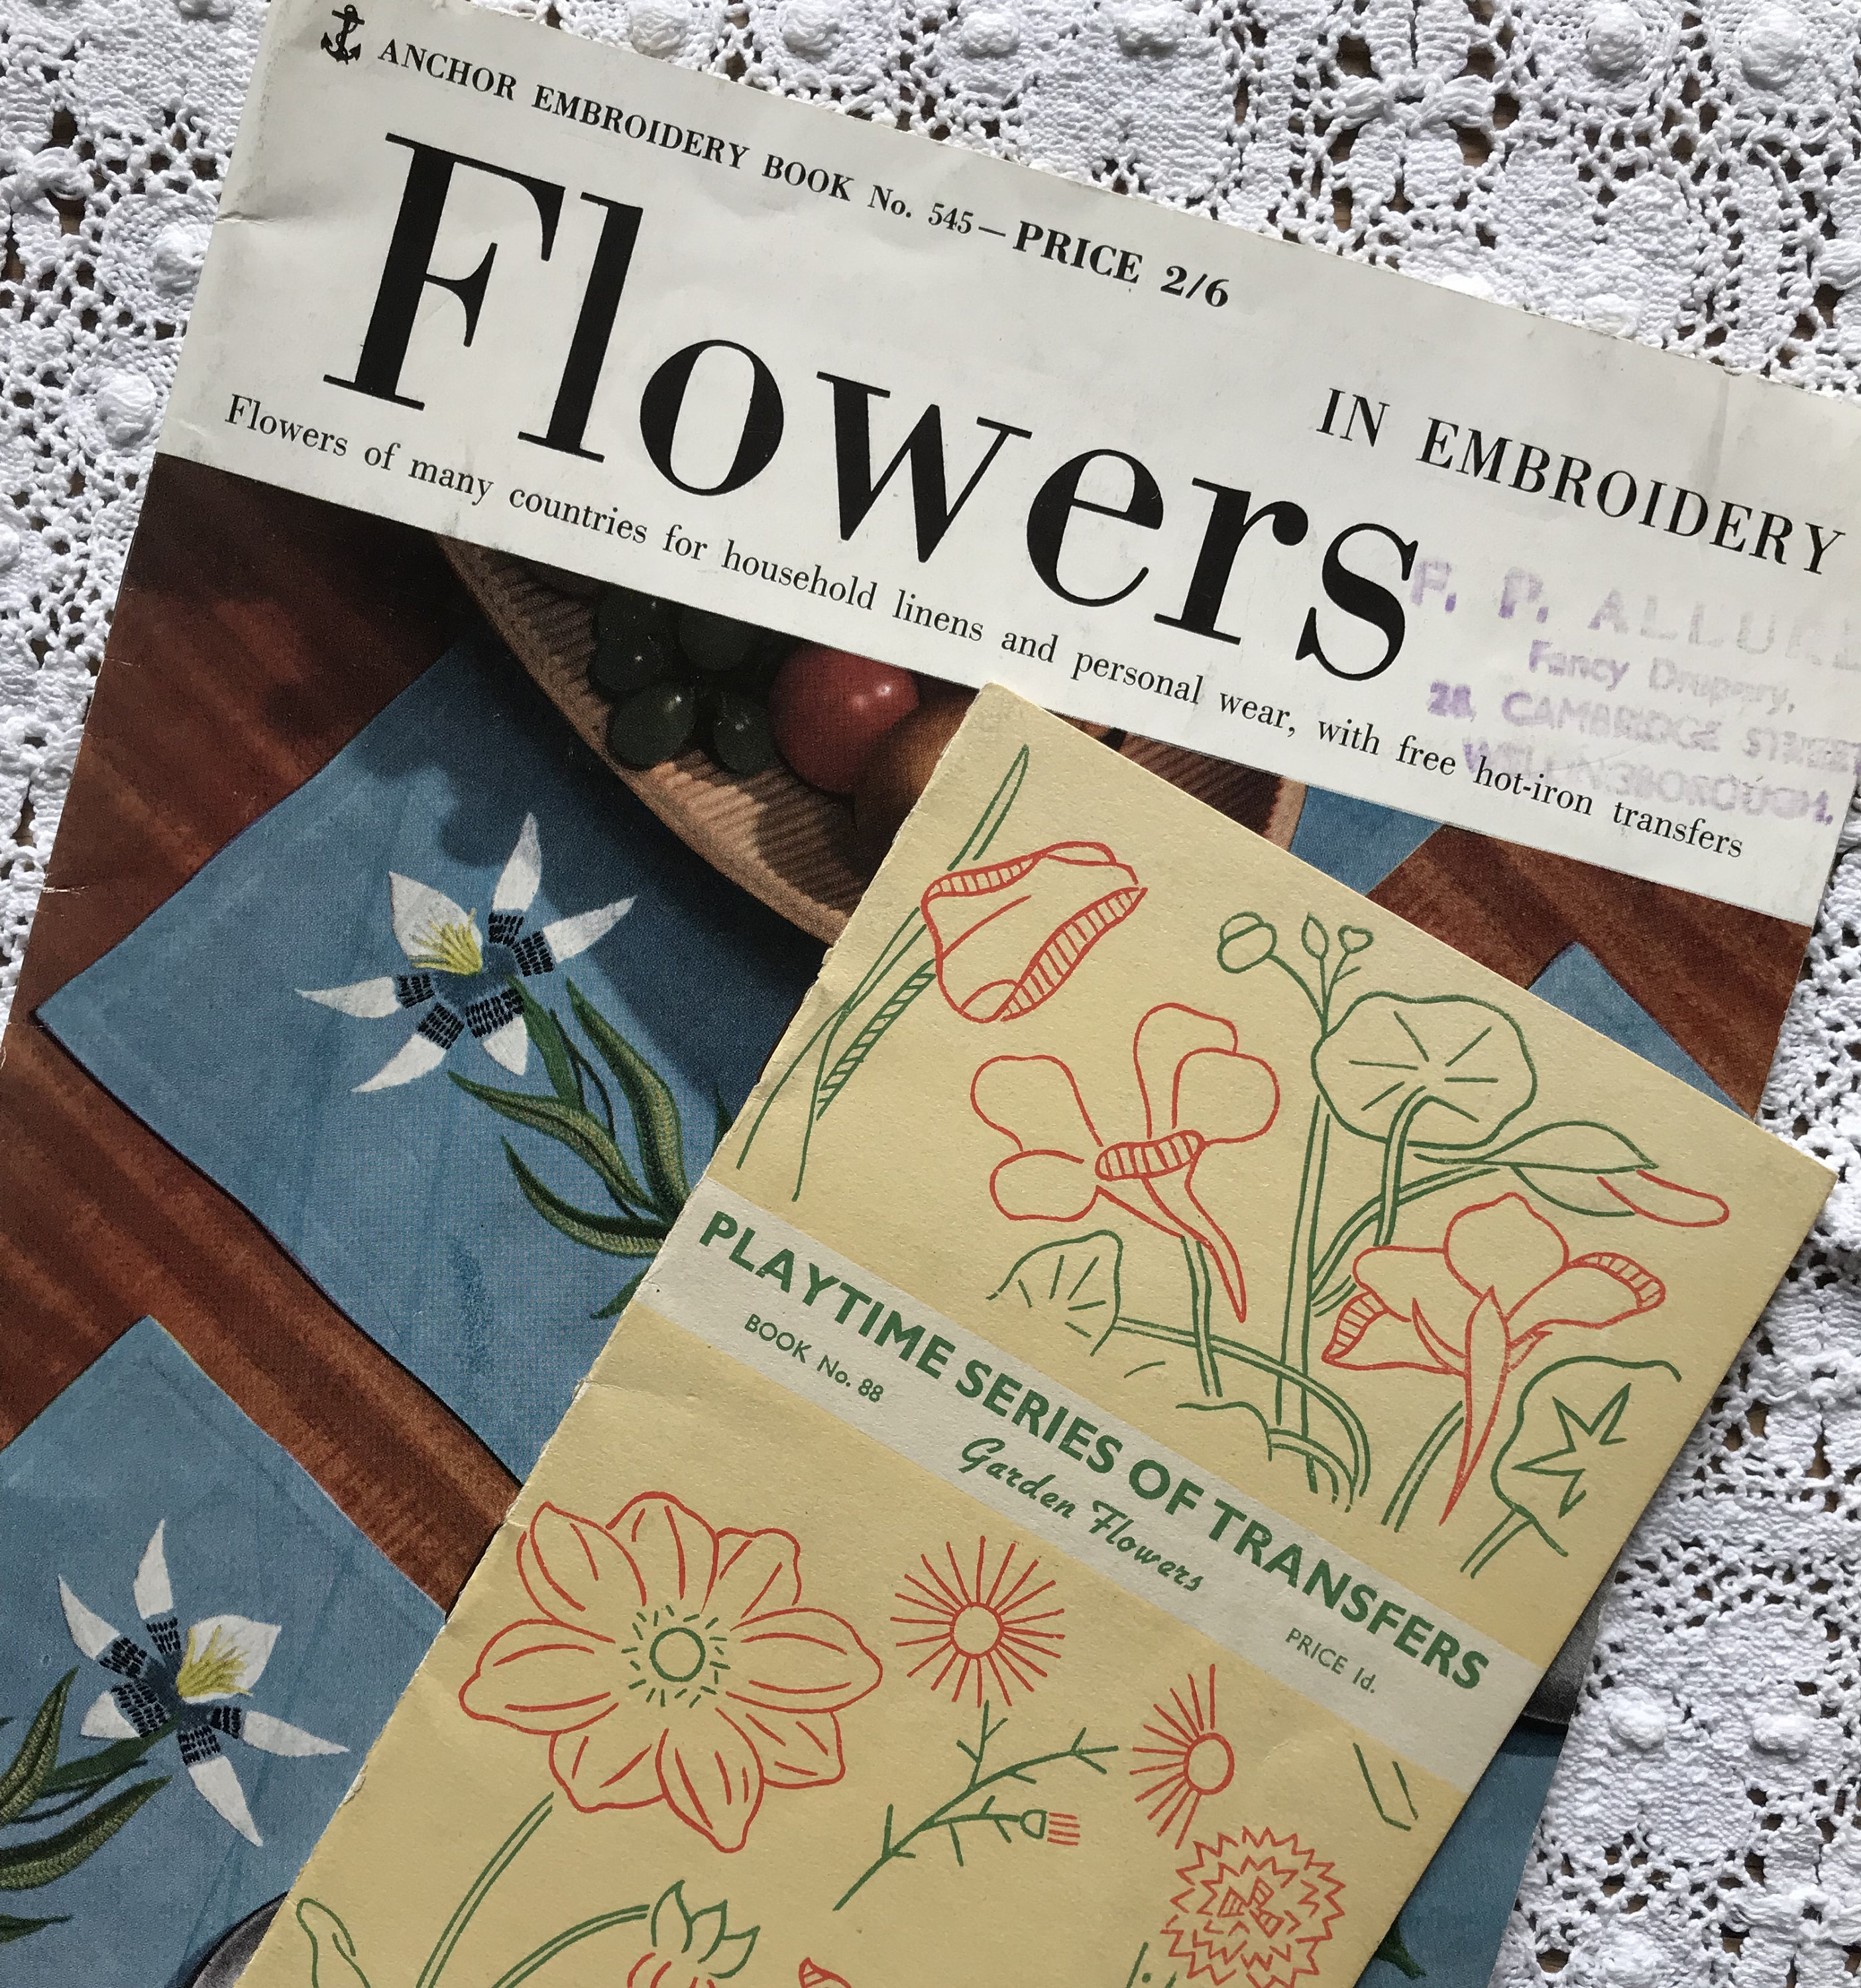 Vintage Embroidery Patterns Free Two Vintage Embroidery Patterntransfer Books Flowers Slow Stitching Floral Embroidery Iron On Transfers Embroidery Stitches